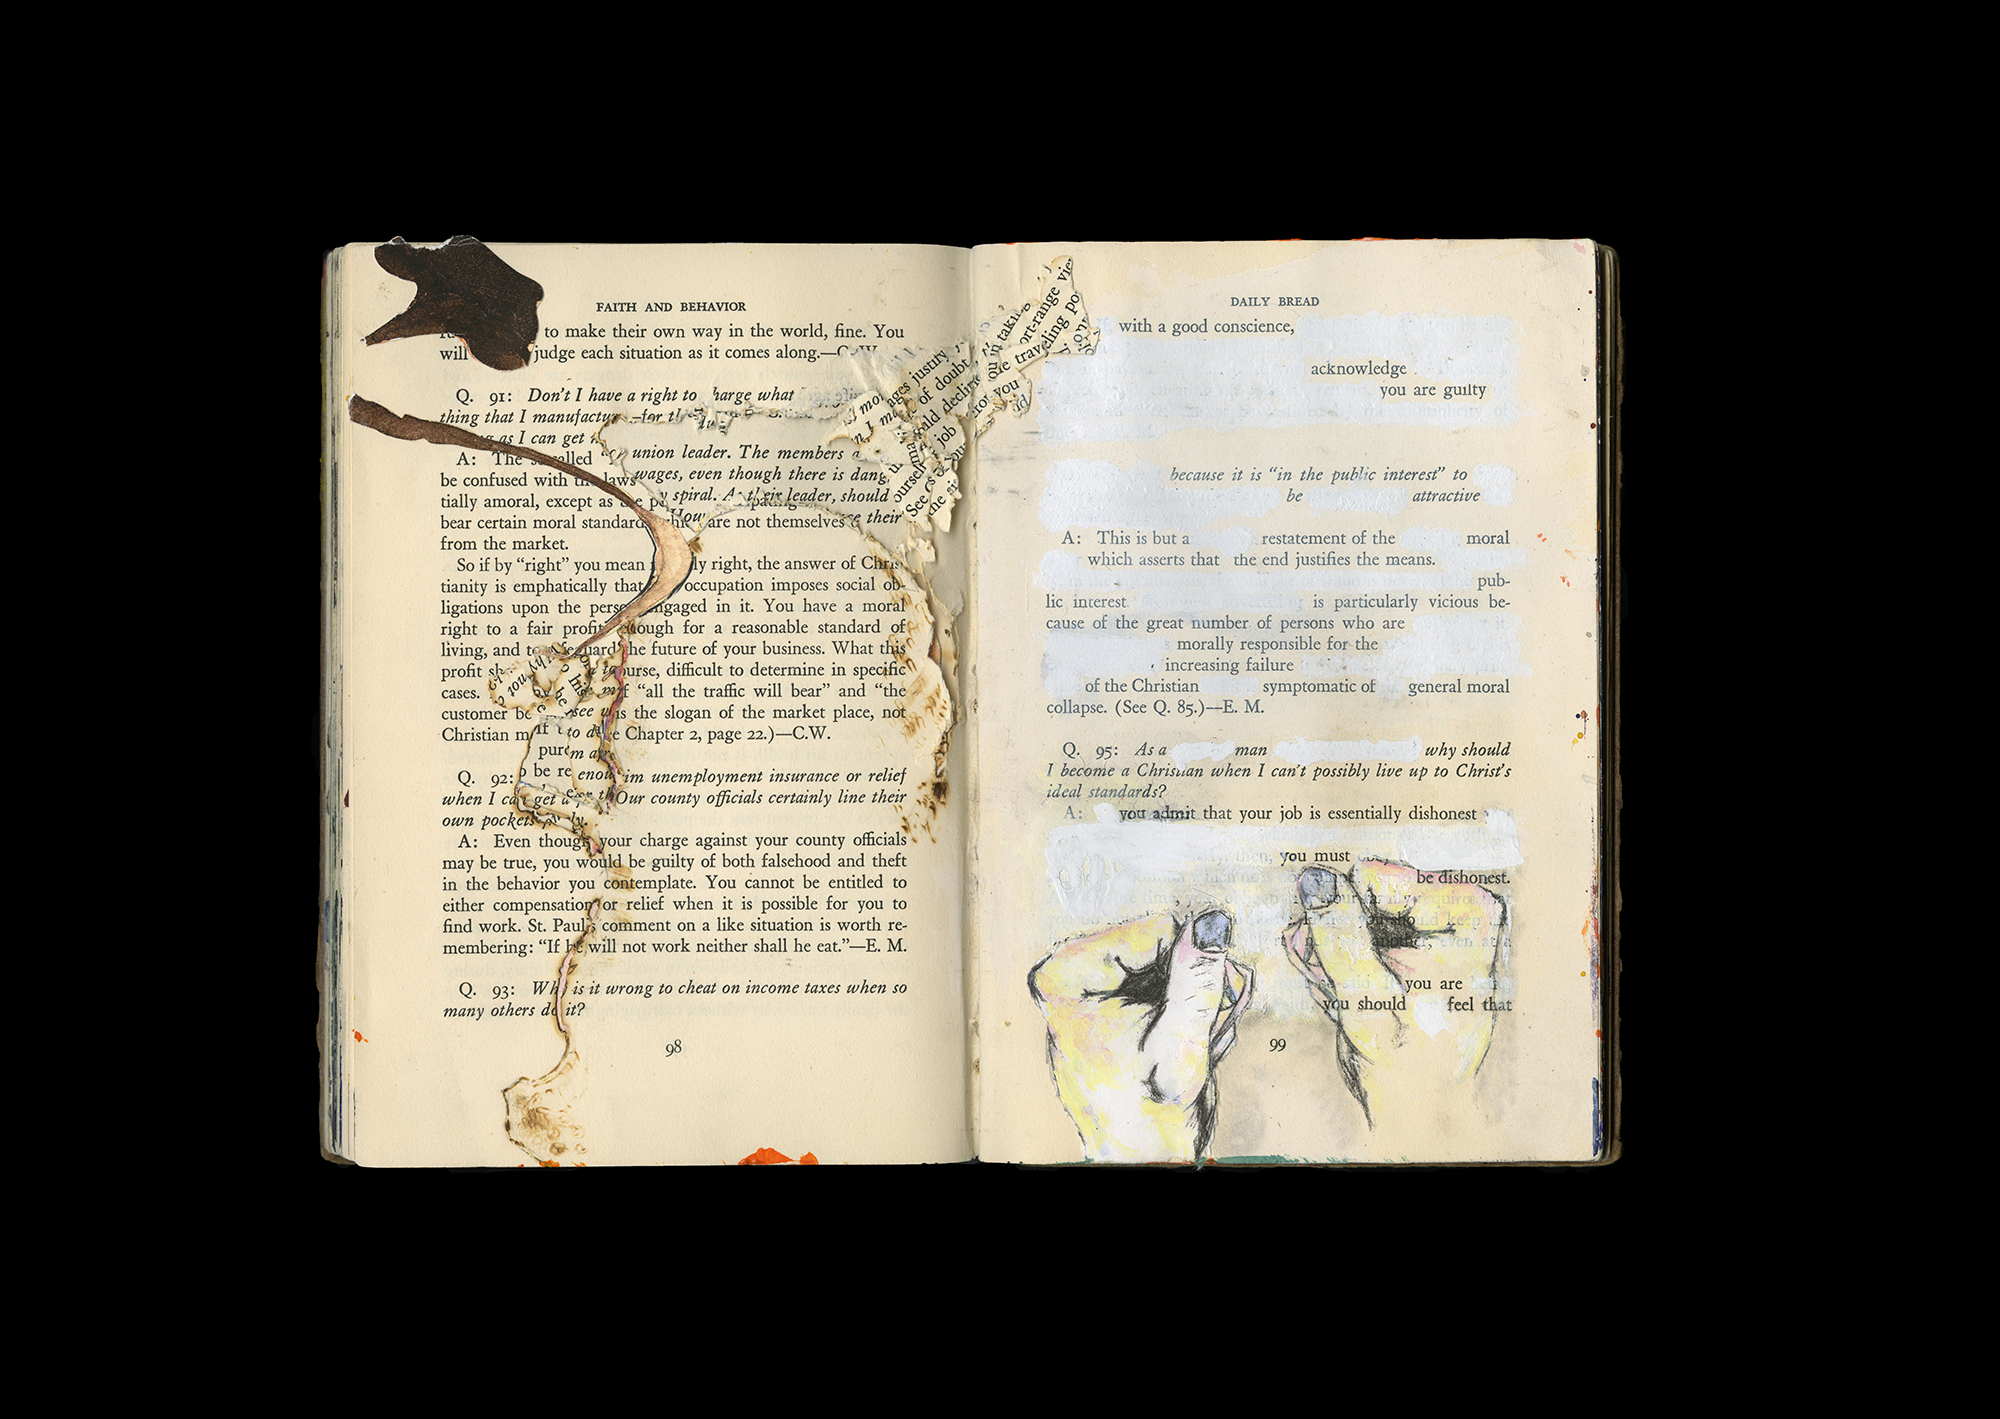  Noah Steinmann  Altered Book, Faith, and Behavior  Acrylic, watercolor, matte medium, ink, and found images from “The Grape” by Chad Walsh and Eric Montizambert  8.5” x 11’’  2018 